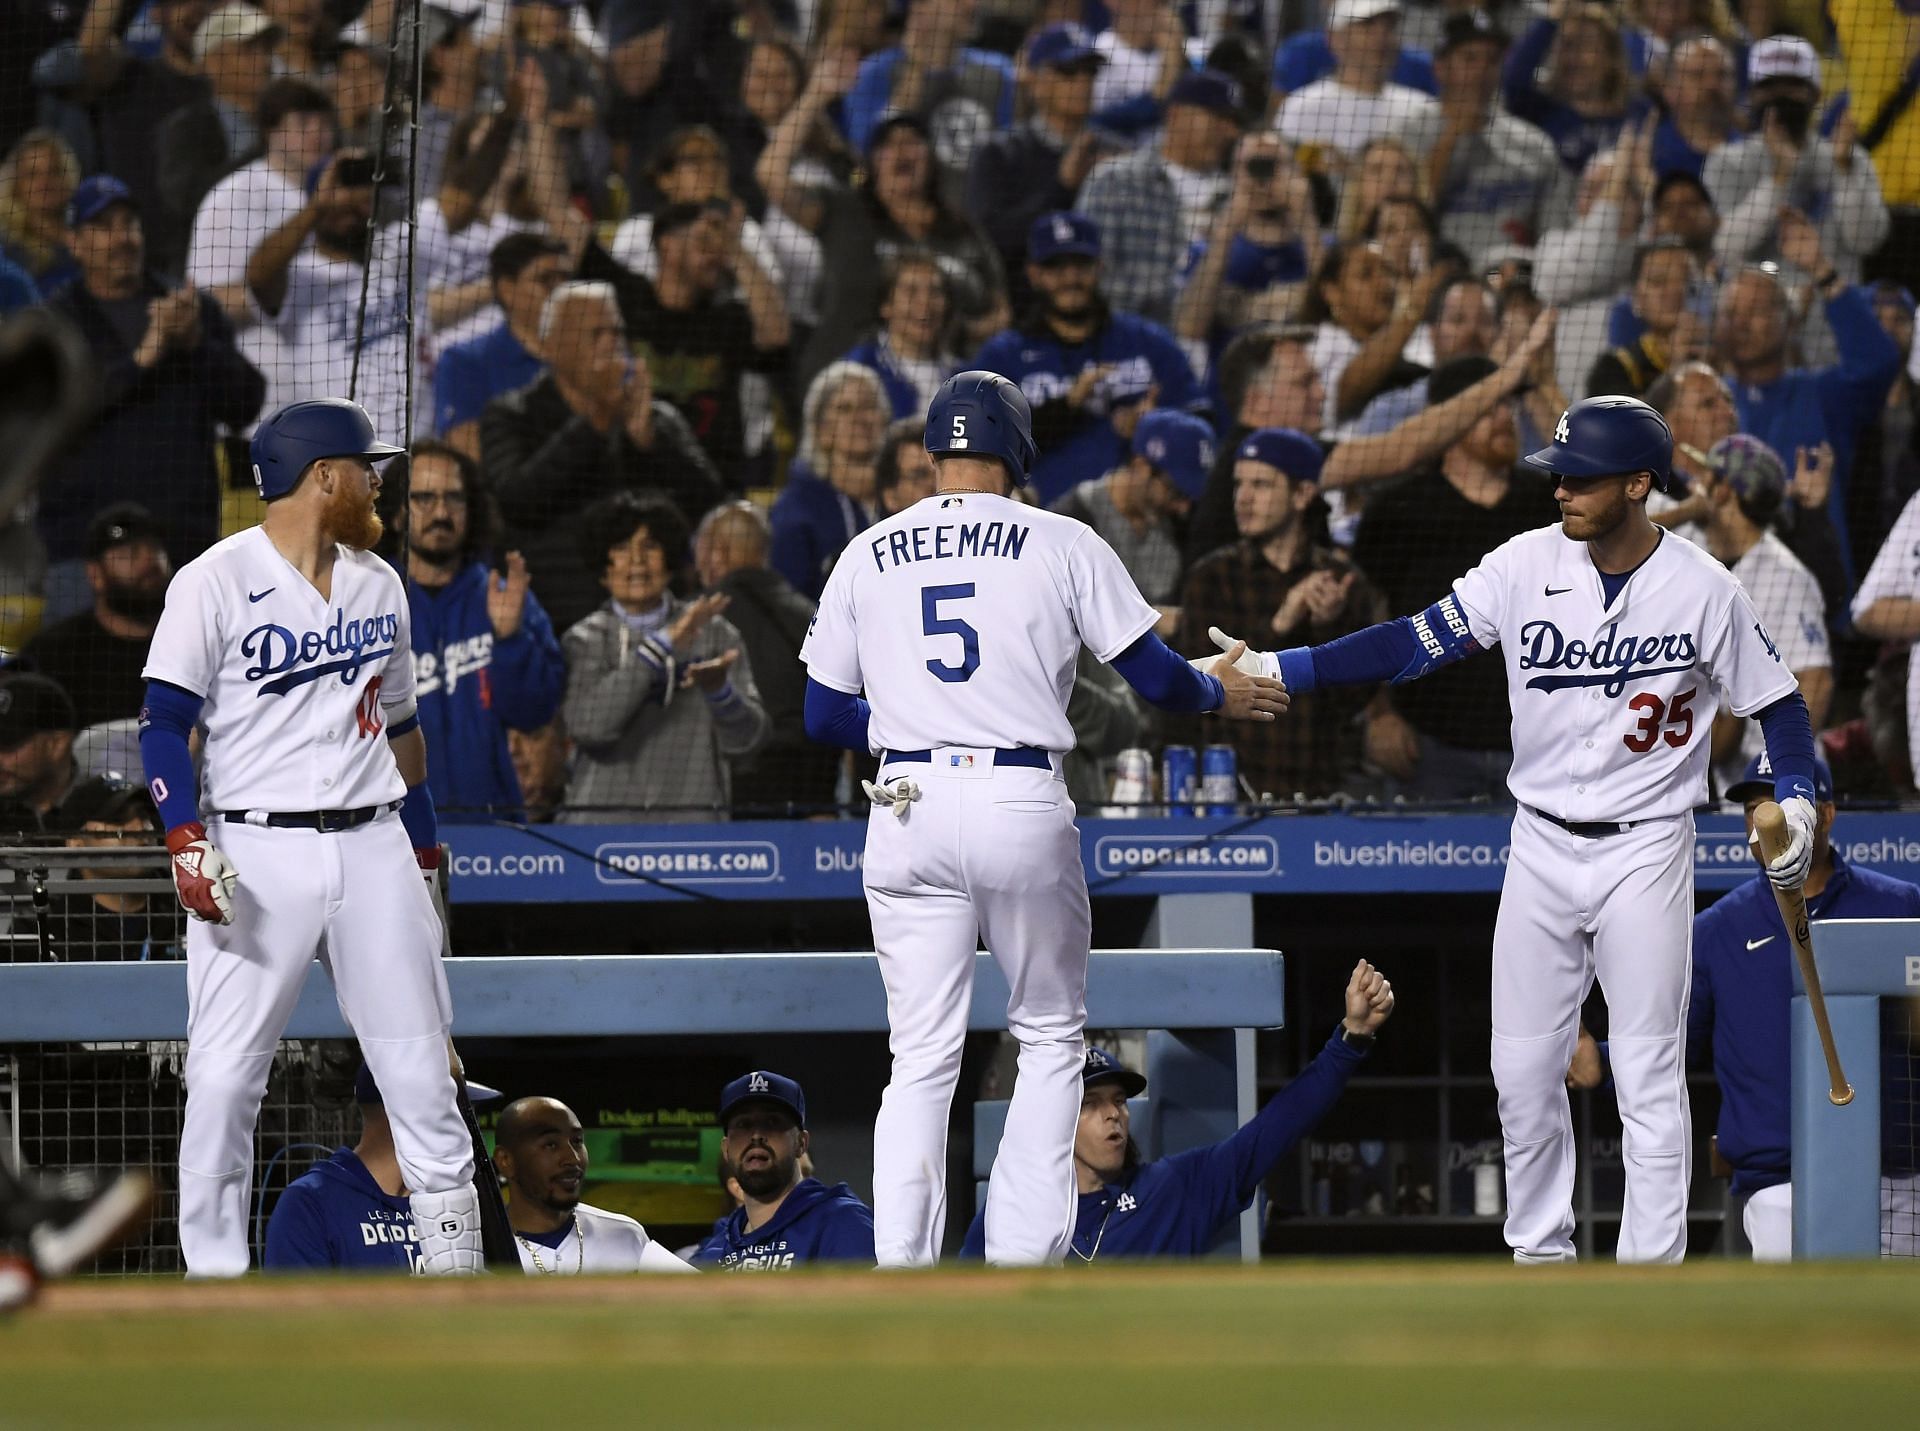 Los Angeles Dodgers 1B Freddie Freeman has become a celebrity among fans with his new team